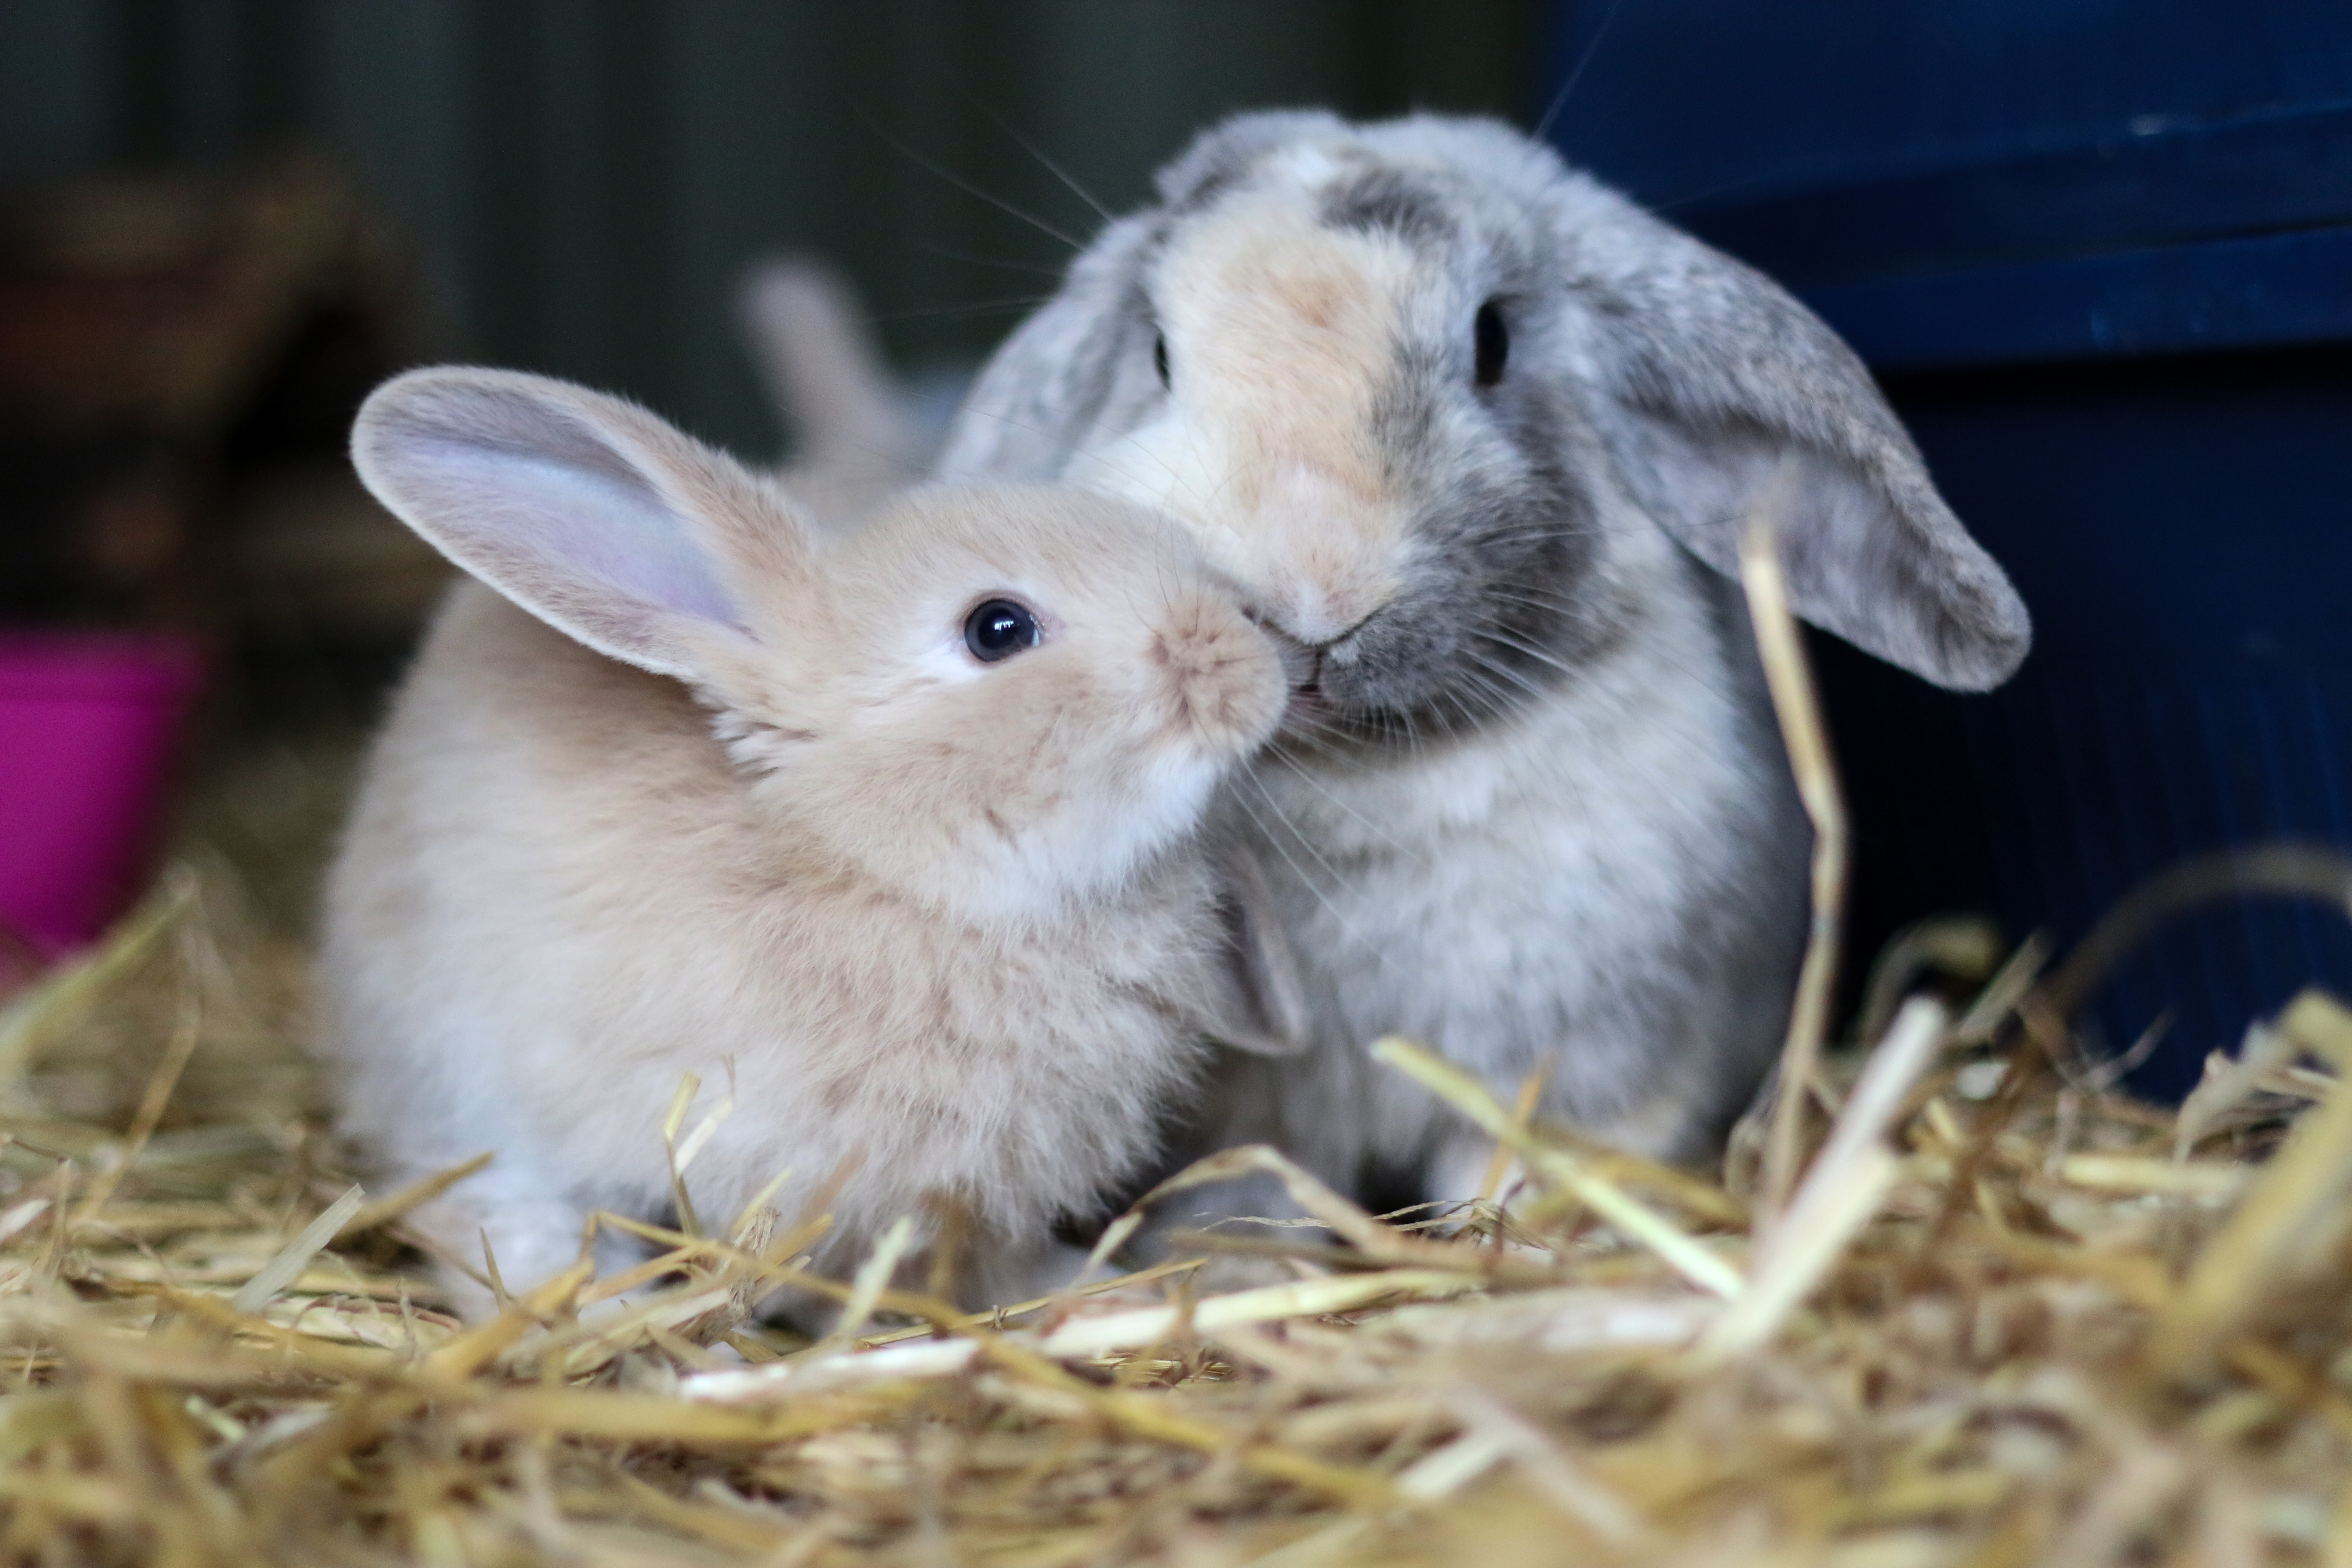 A pair of rabbits sitting side by side in their hay.